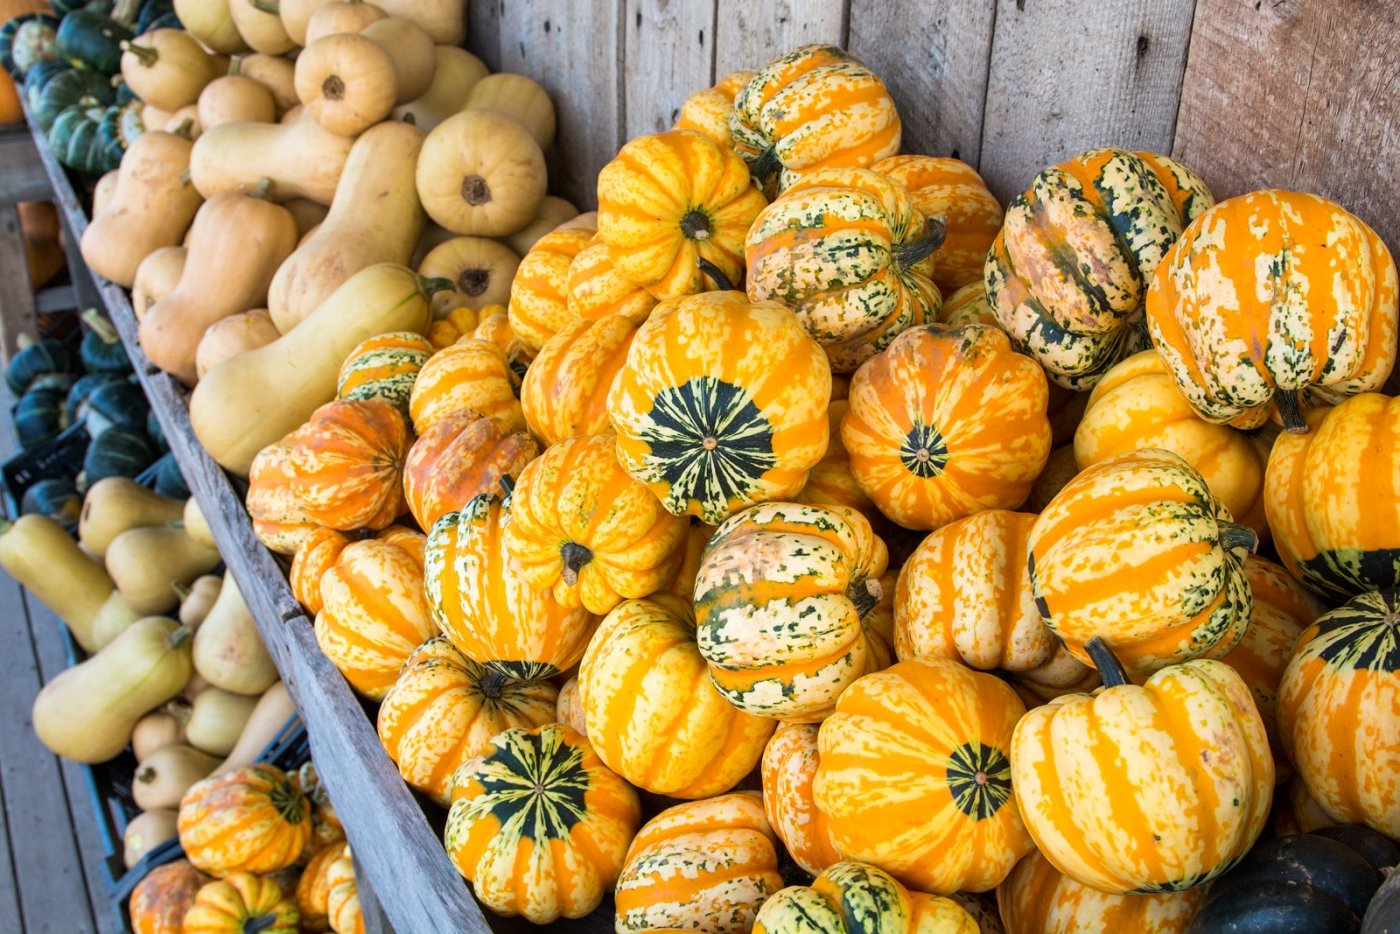 bunches of gourds and squash